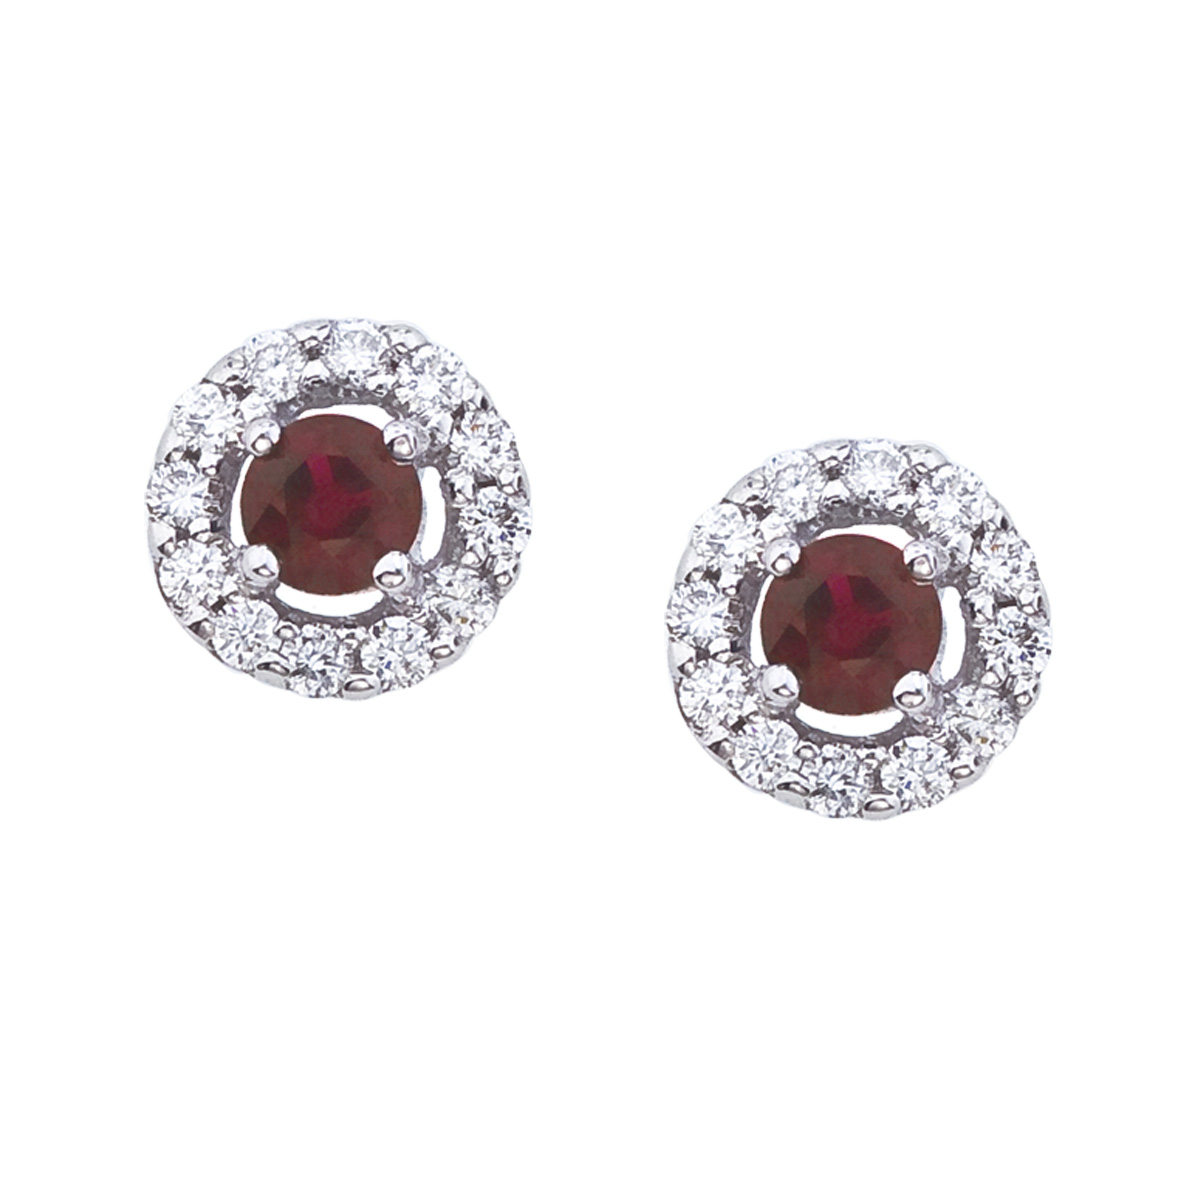 JCX2098: Genuine 5 mm round ruby earrings with .36 total ct diamonds.